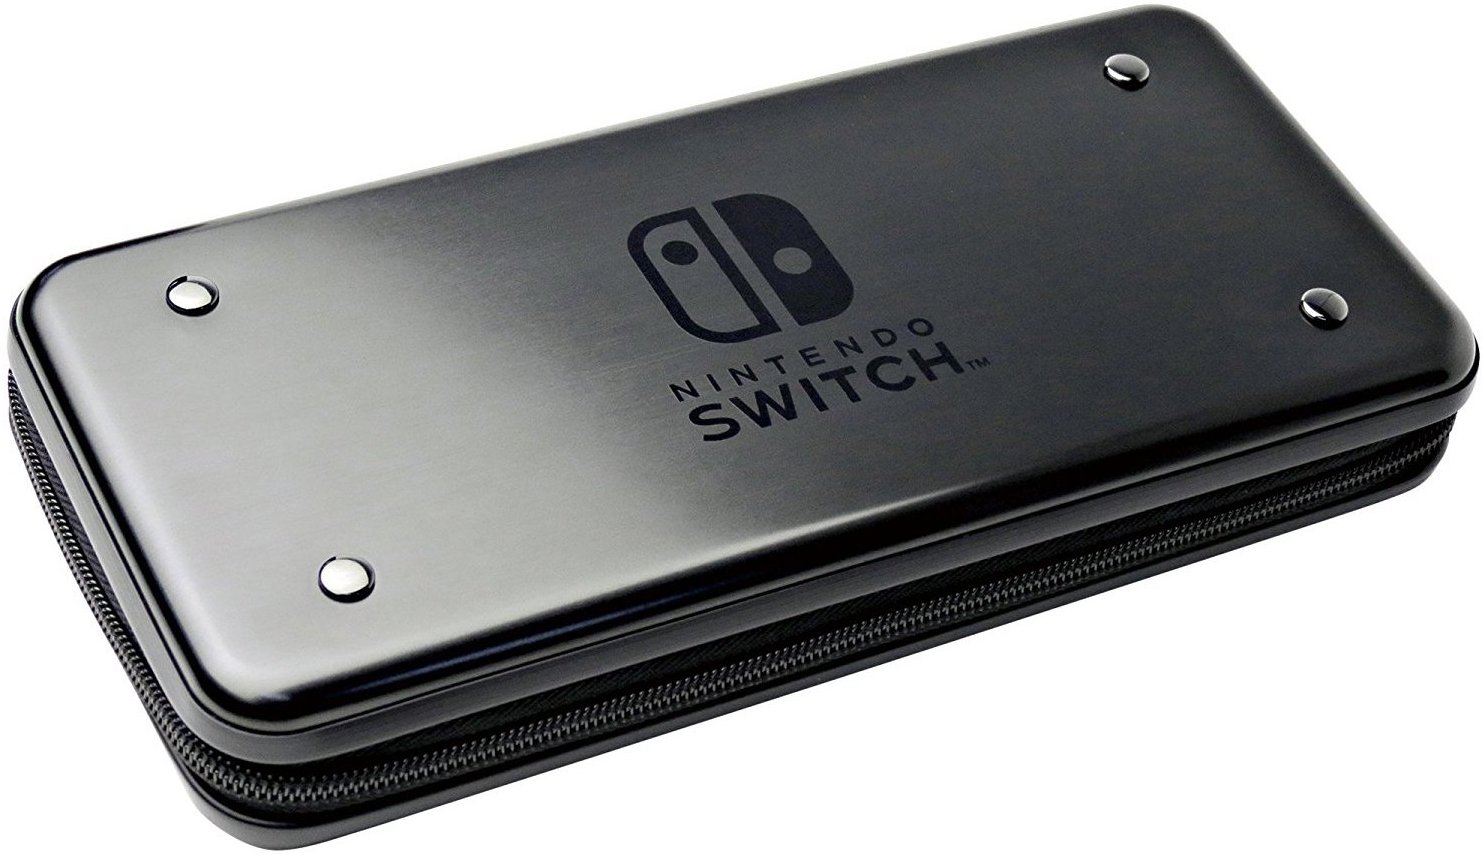 Tips For Getting The Most Out Of Your Switch